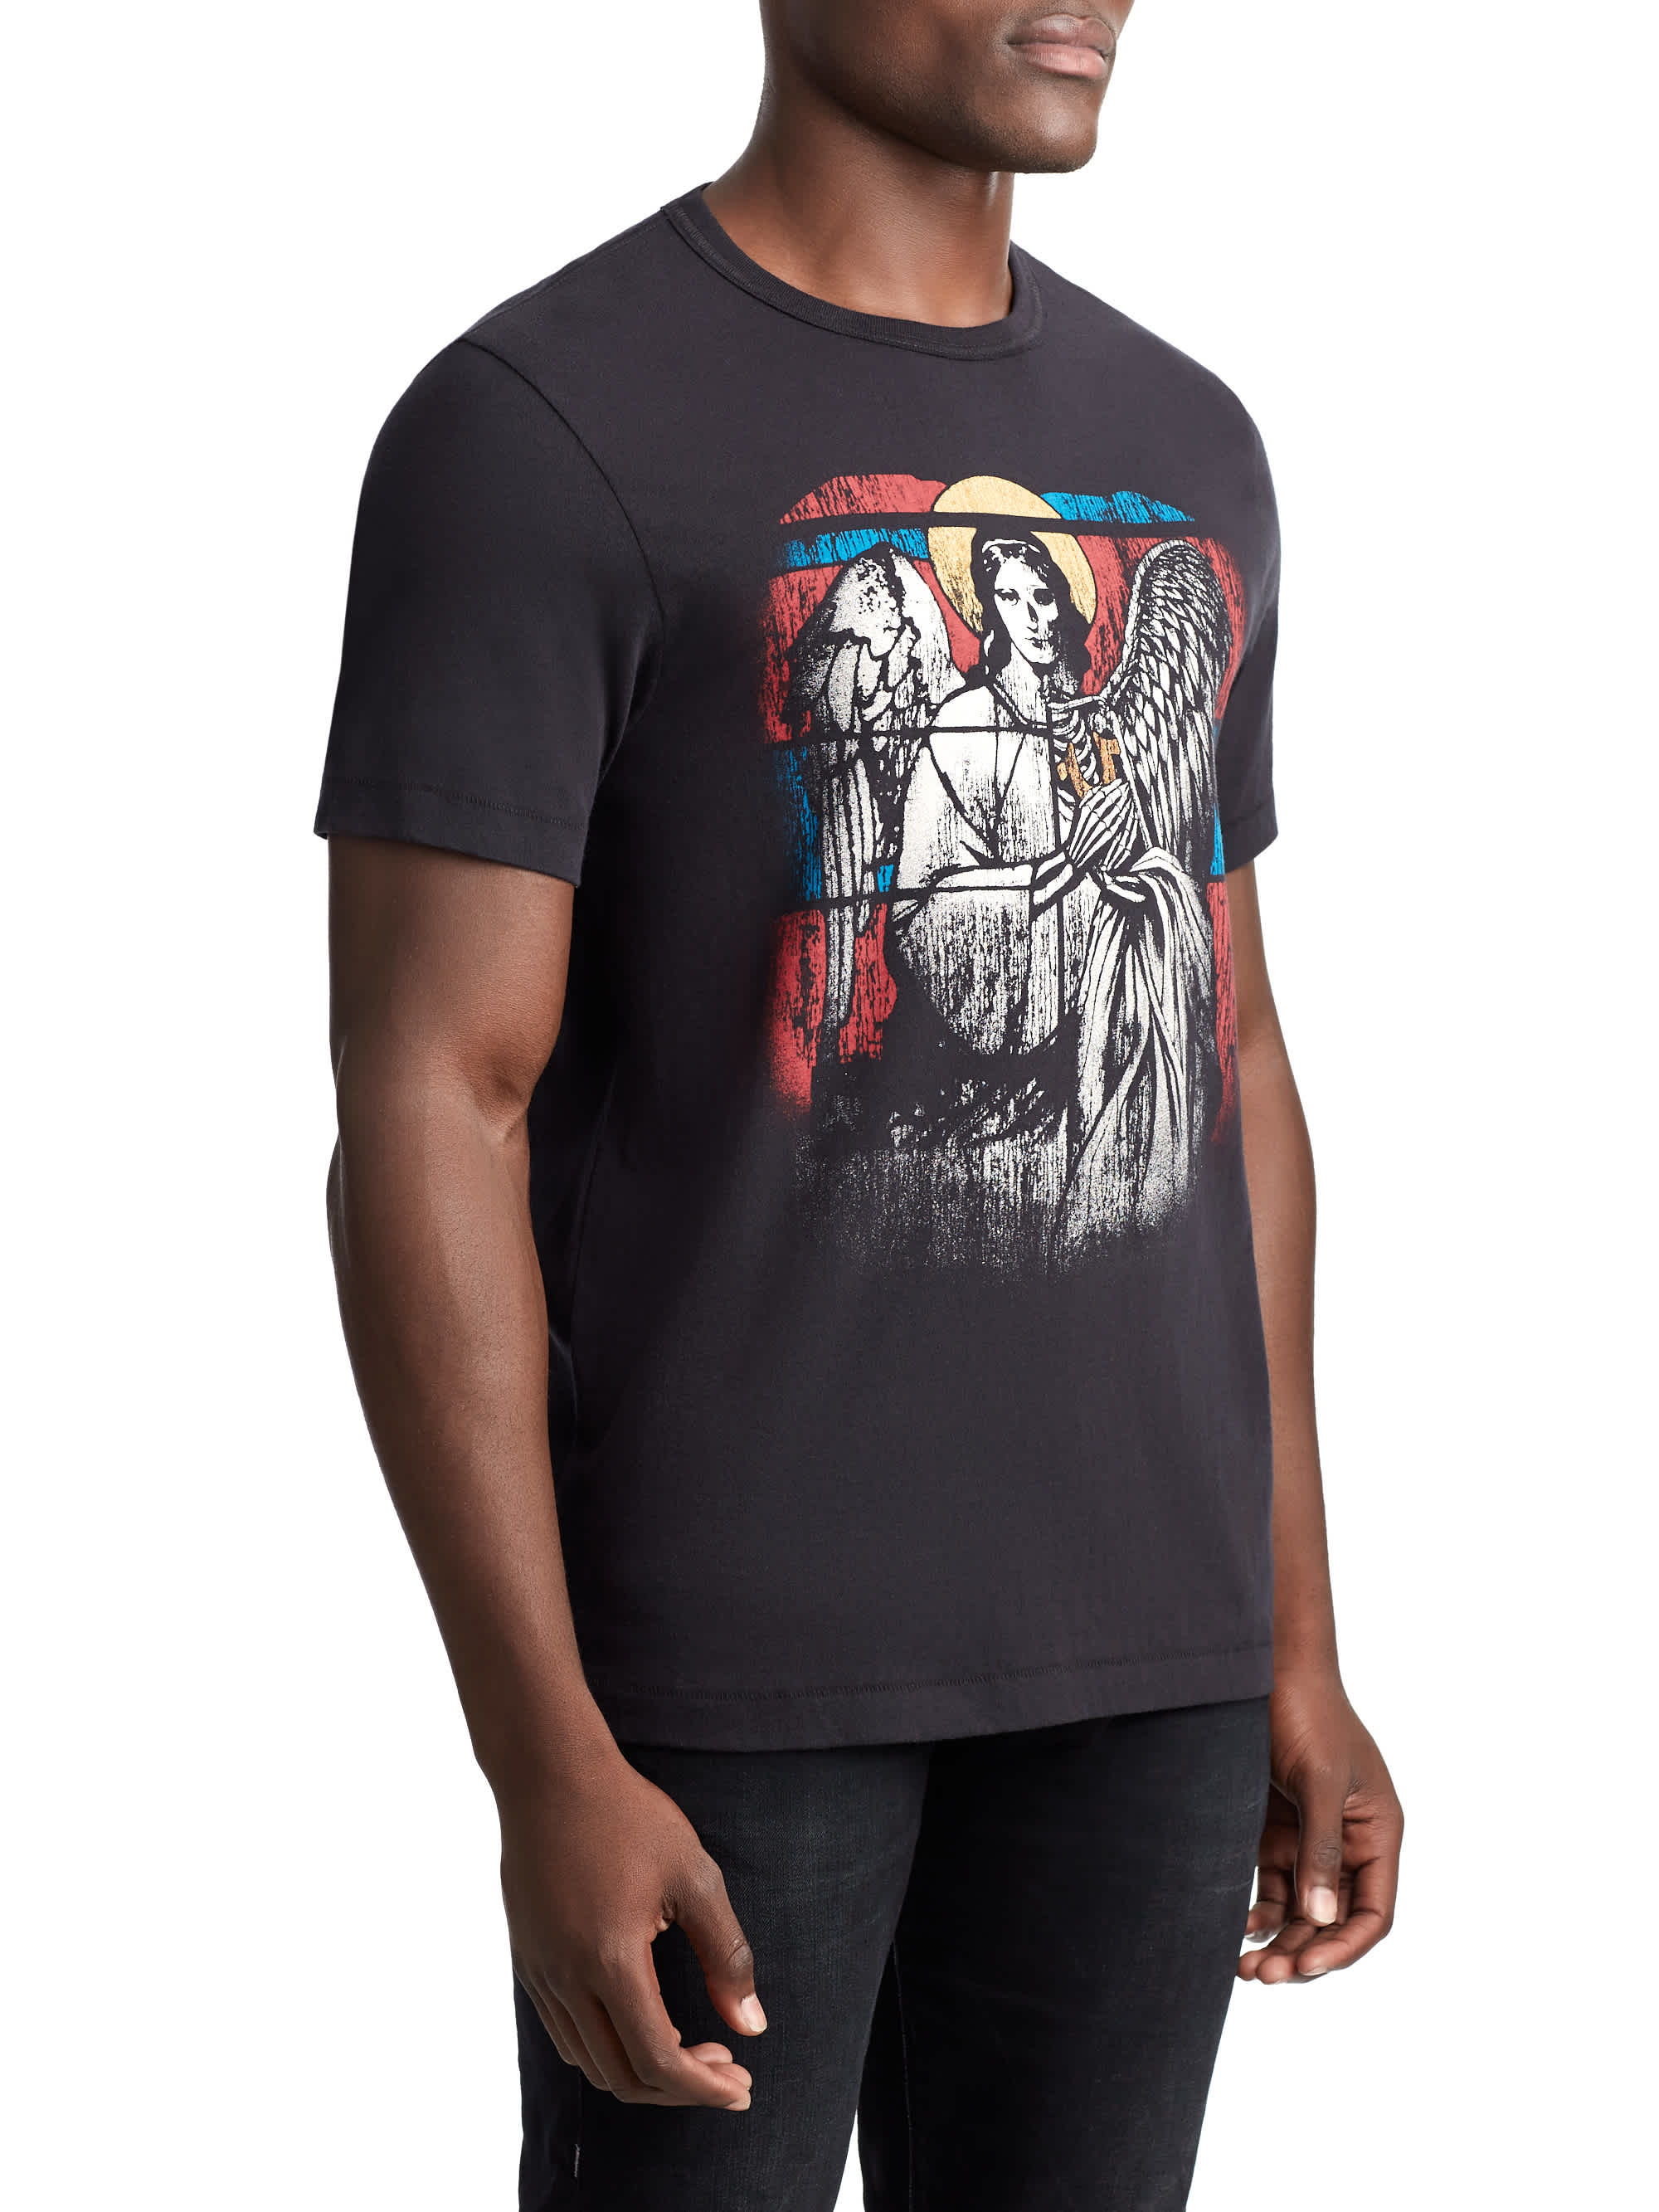 MENS GOTHIC STAINED GLASS GRAPHIC TEE